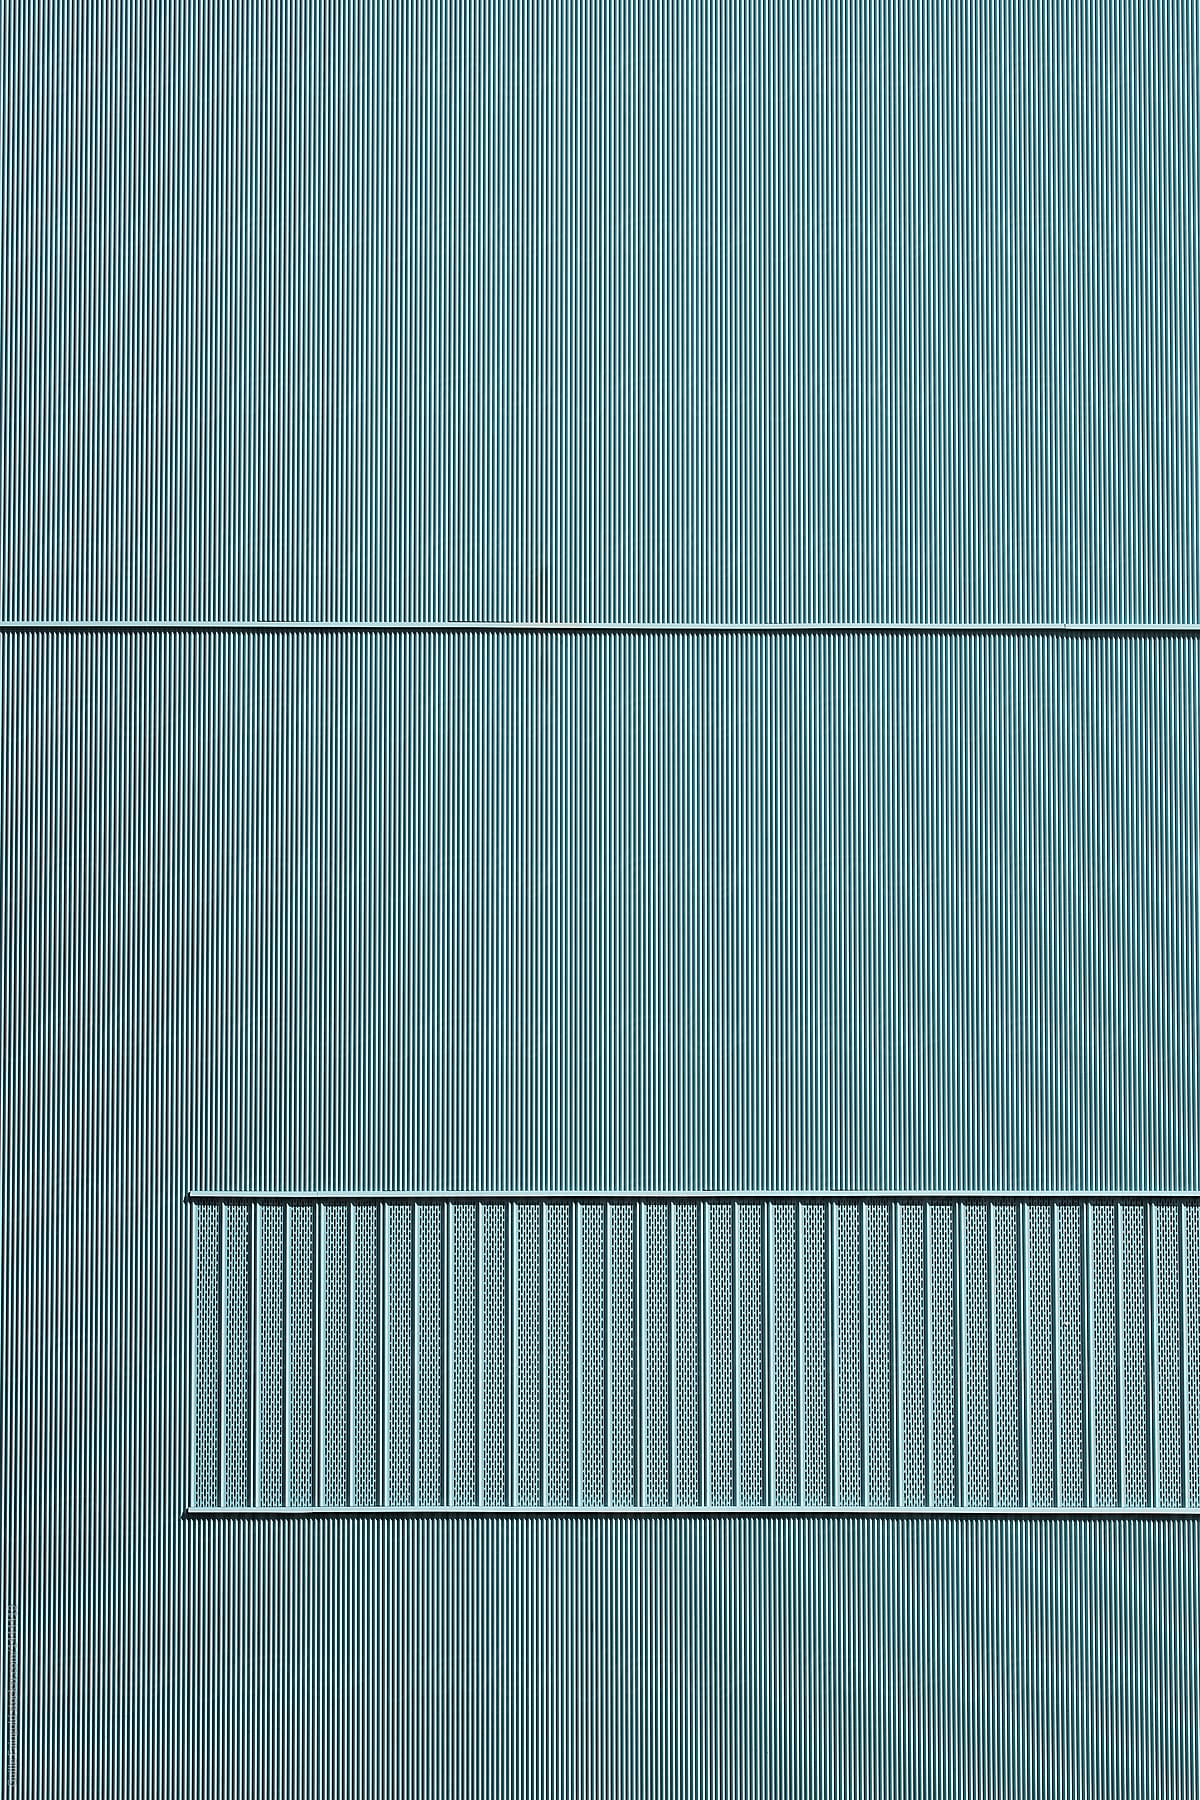 Abstract front view of building facade.